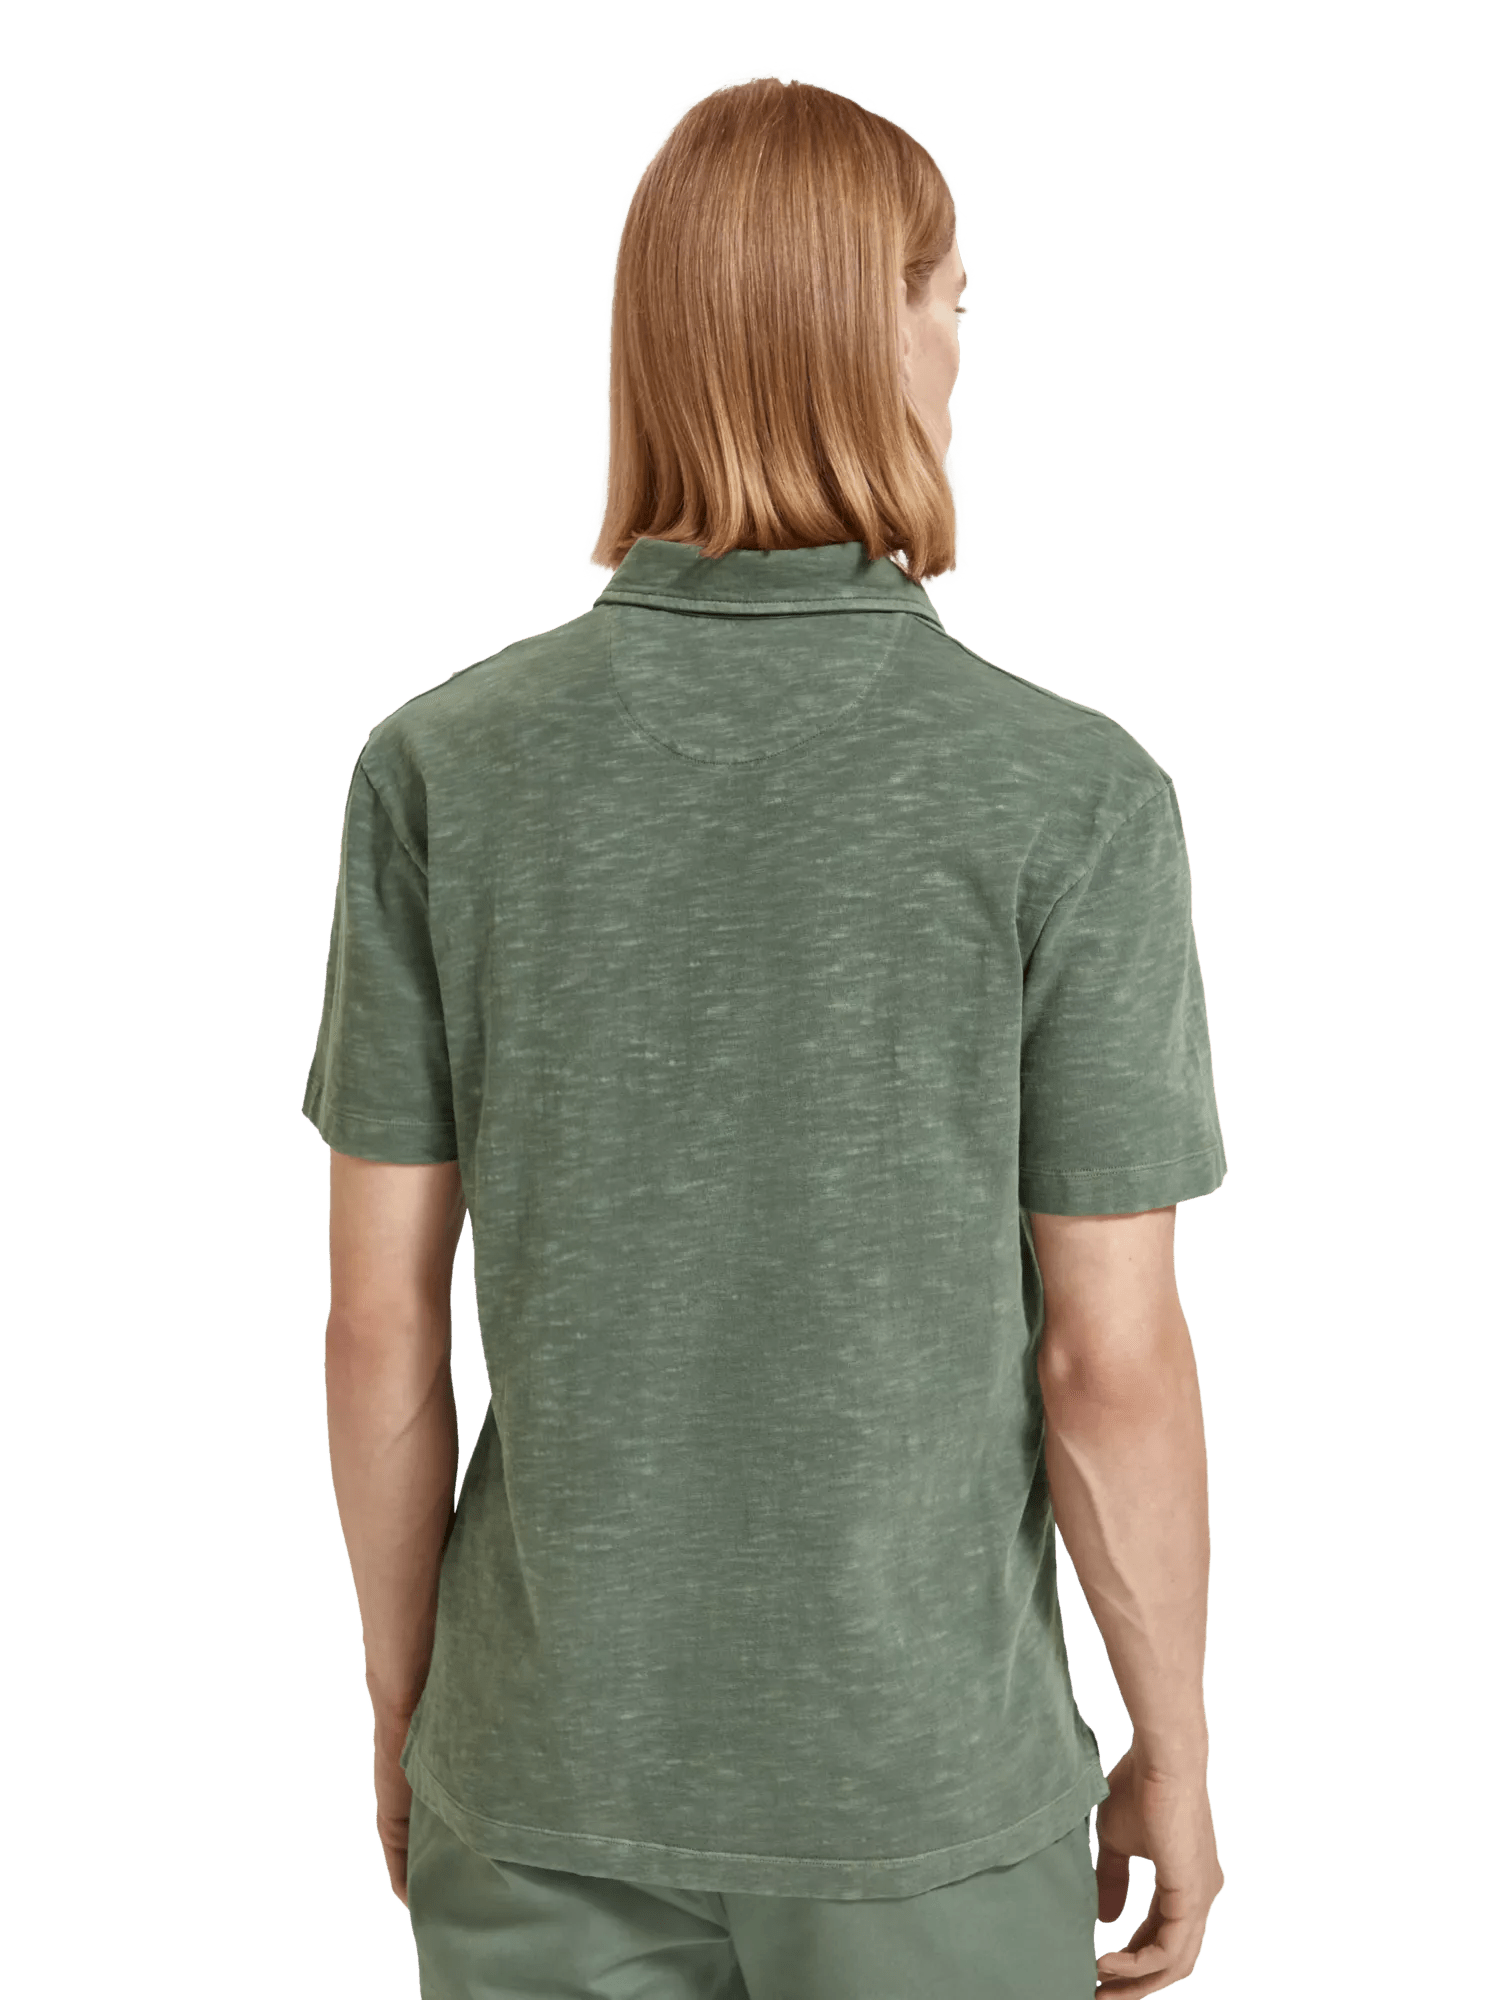 Scotch & Soda Garment-dyed jersey polo in Organic Cotton 174564_1081_MDL_BCK